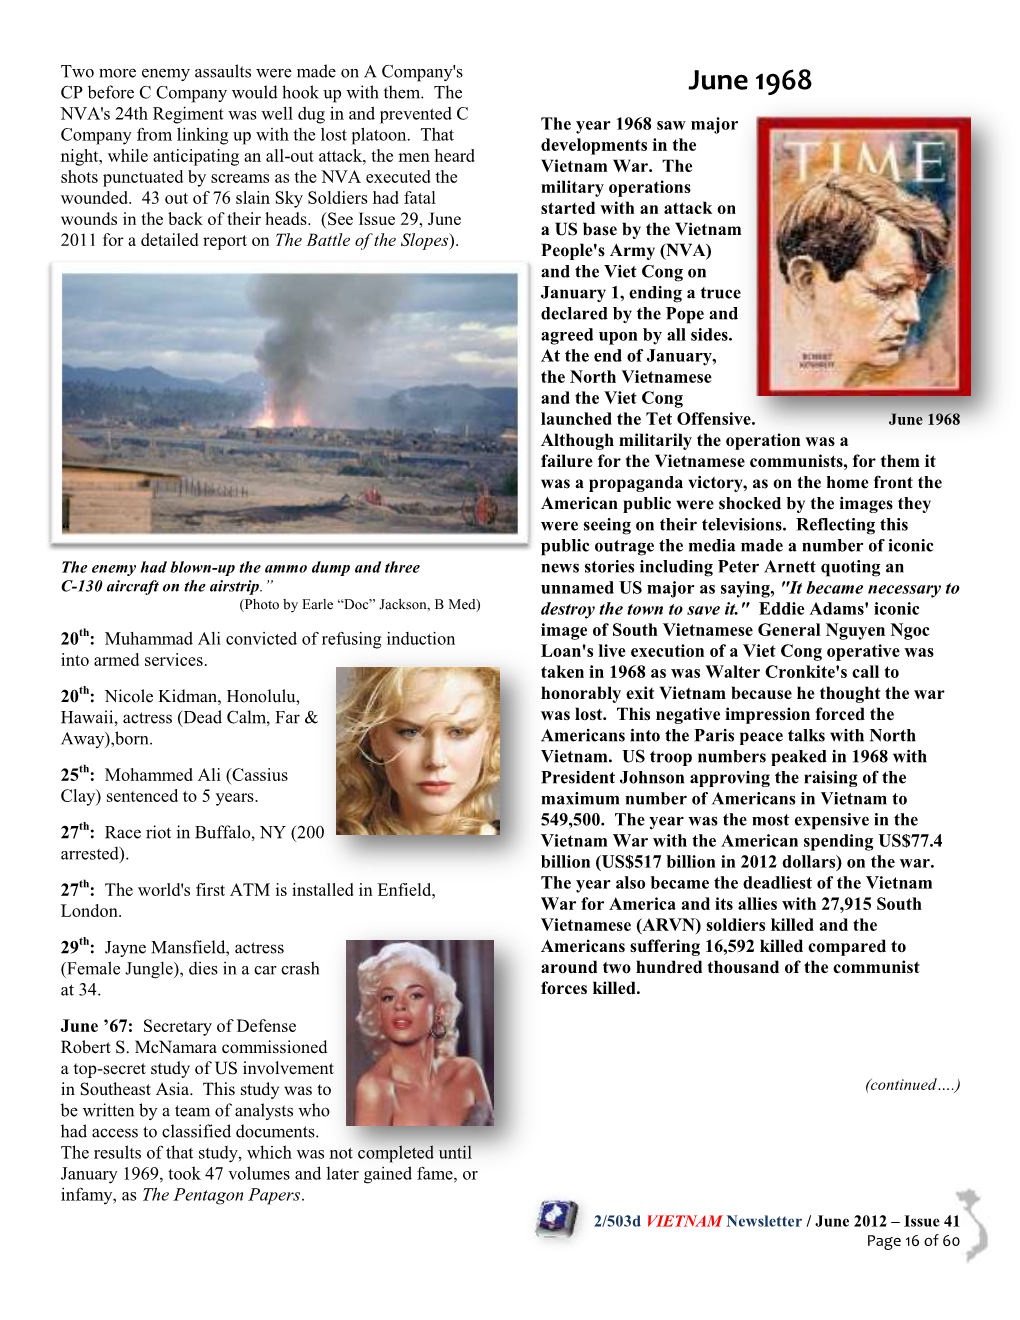 Issue 29, June a US Base by the Vietnam 2011 for a Detailed Report on the Battle of the Slopes)